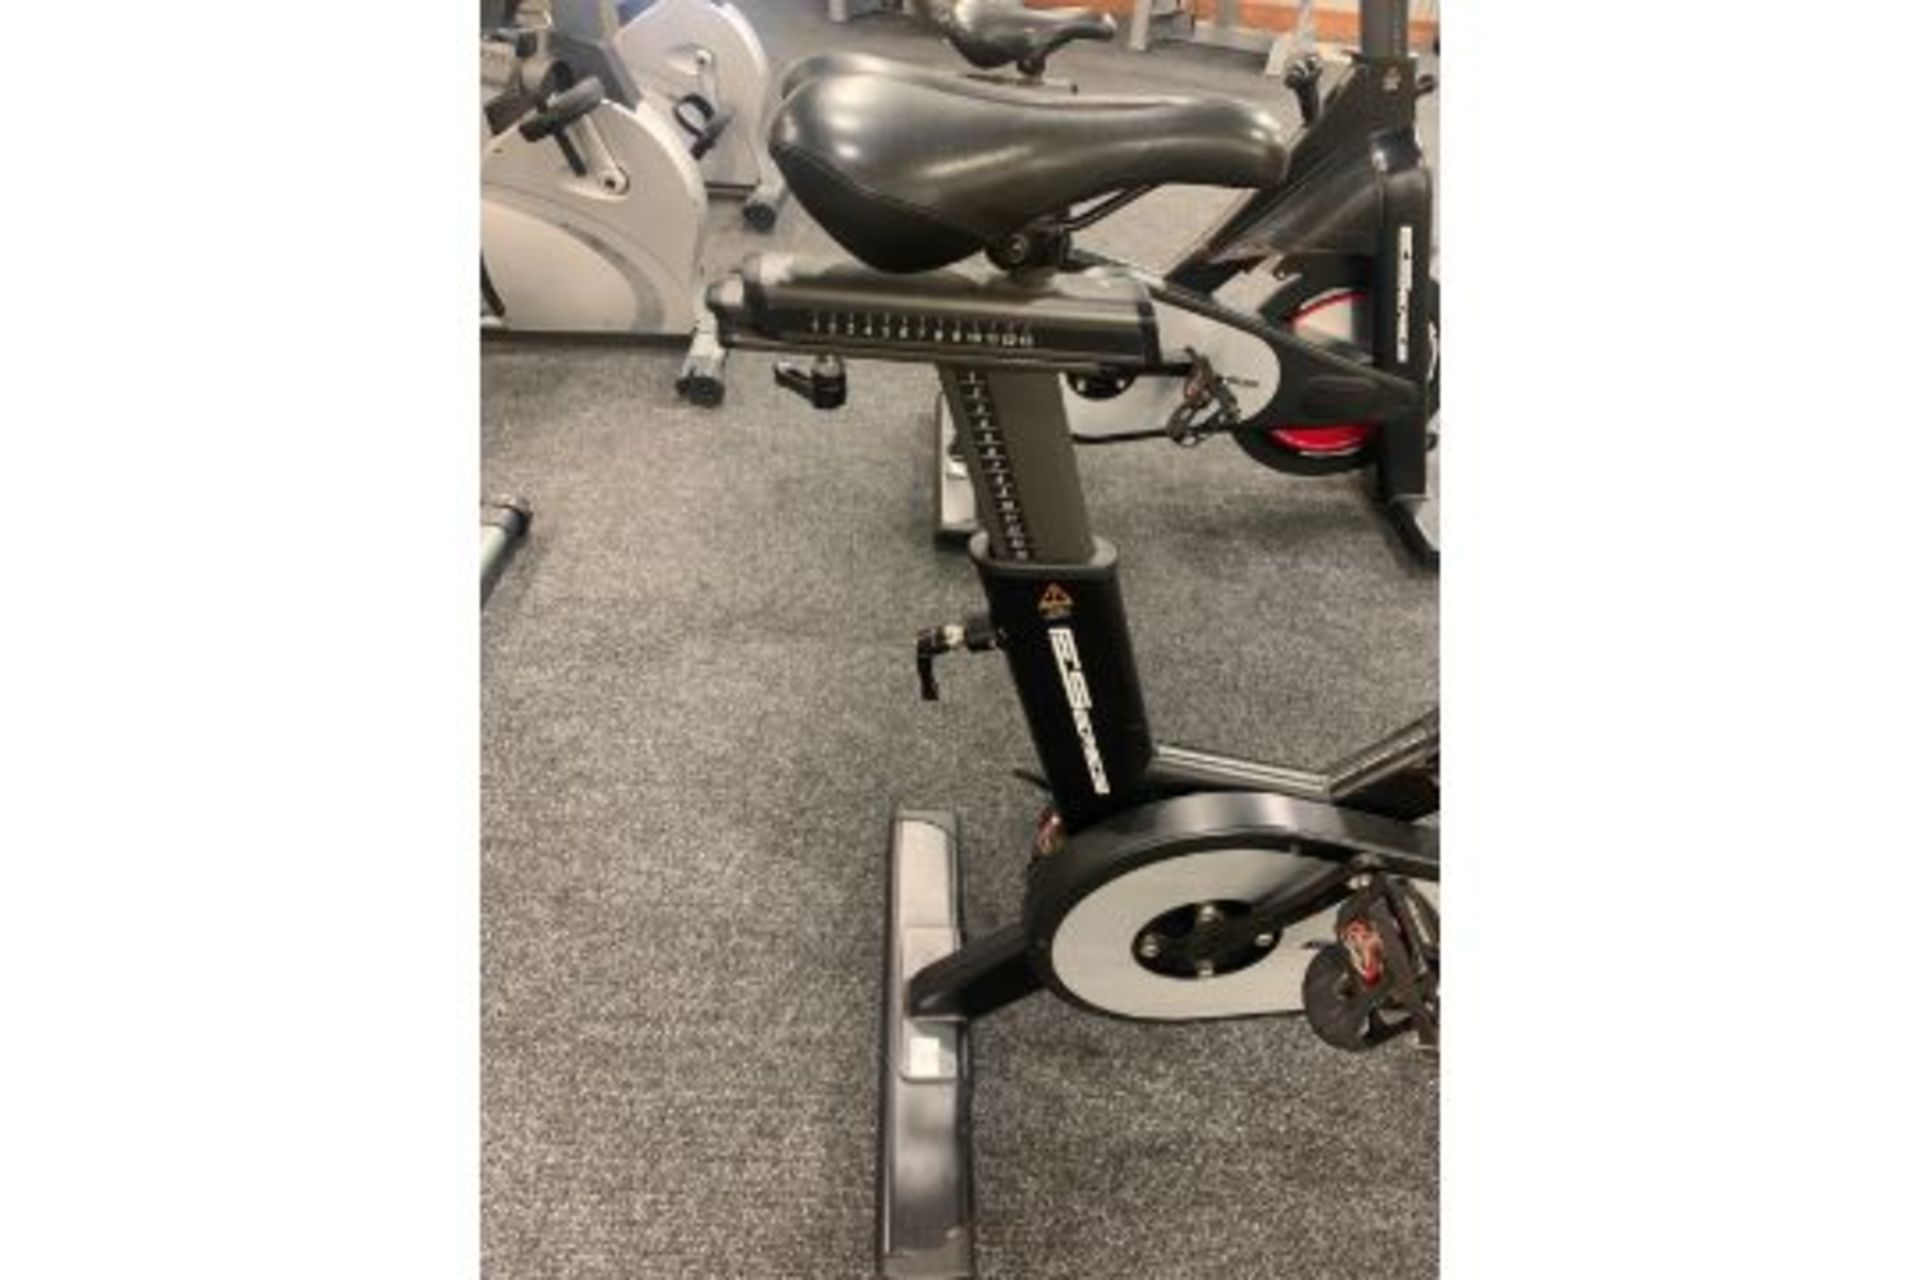 F Series Spin Bike - Image 3 of 3